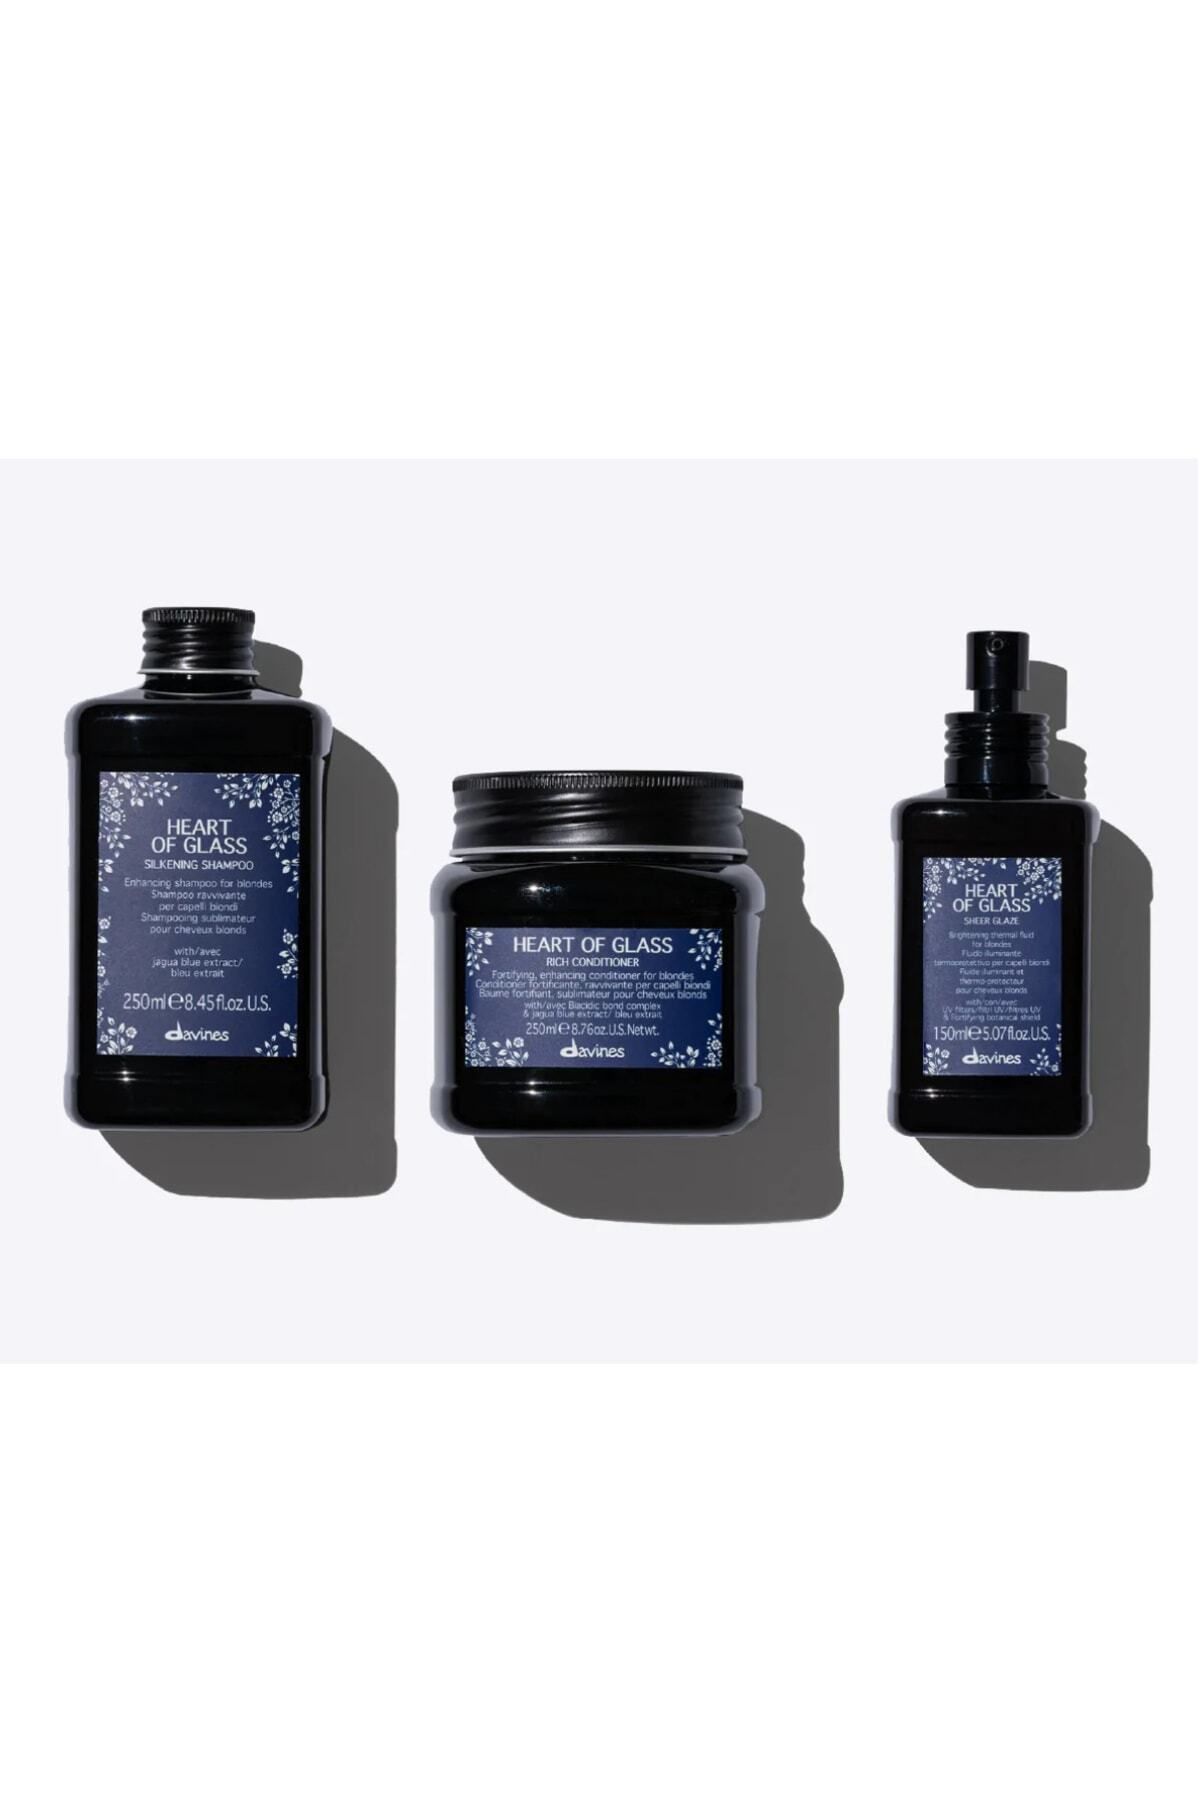 Davines Heart Of Glass Perfect Hair Care For Shiny Strong Healthy Blonde Hairs Set 1KUTU